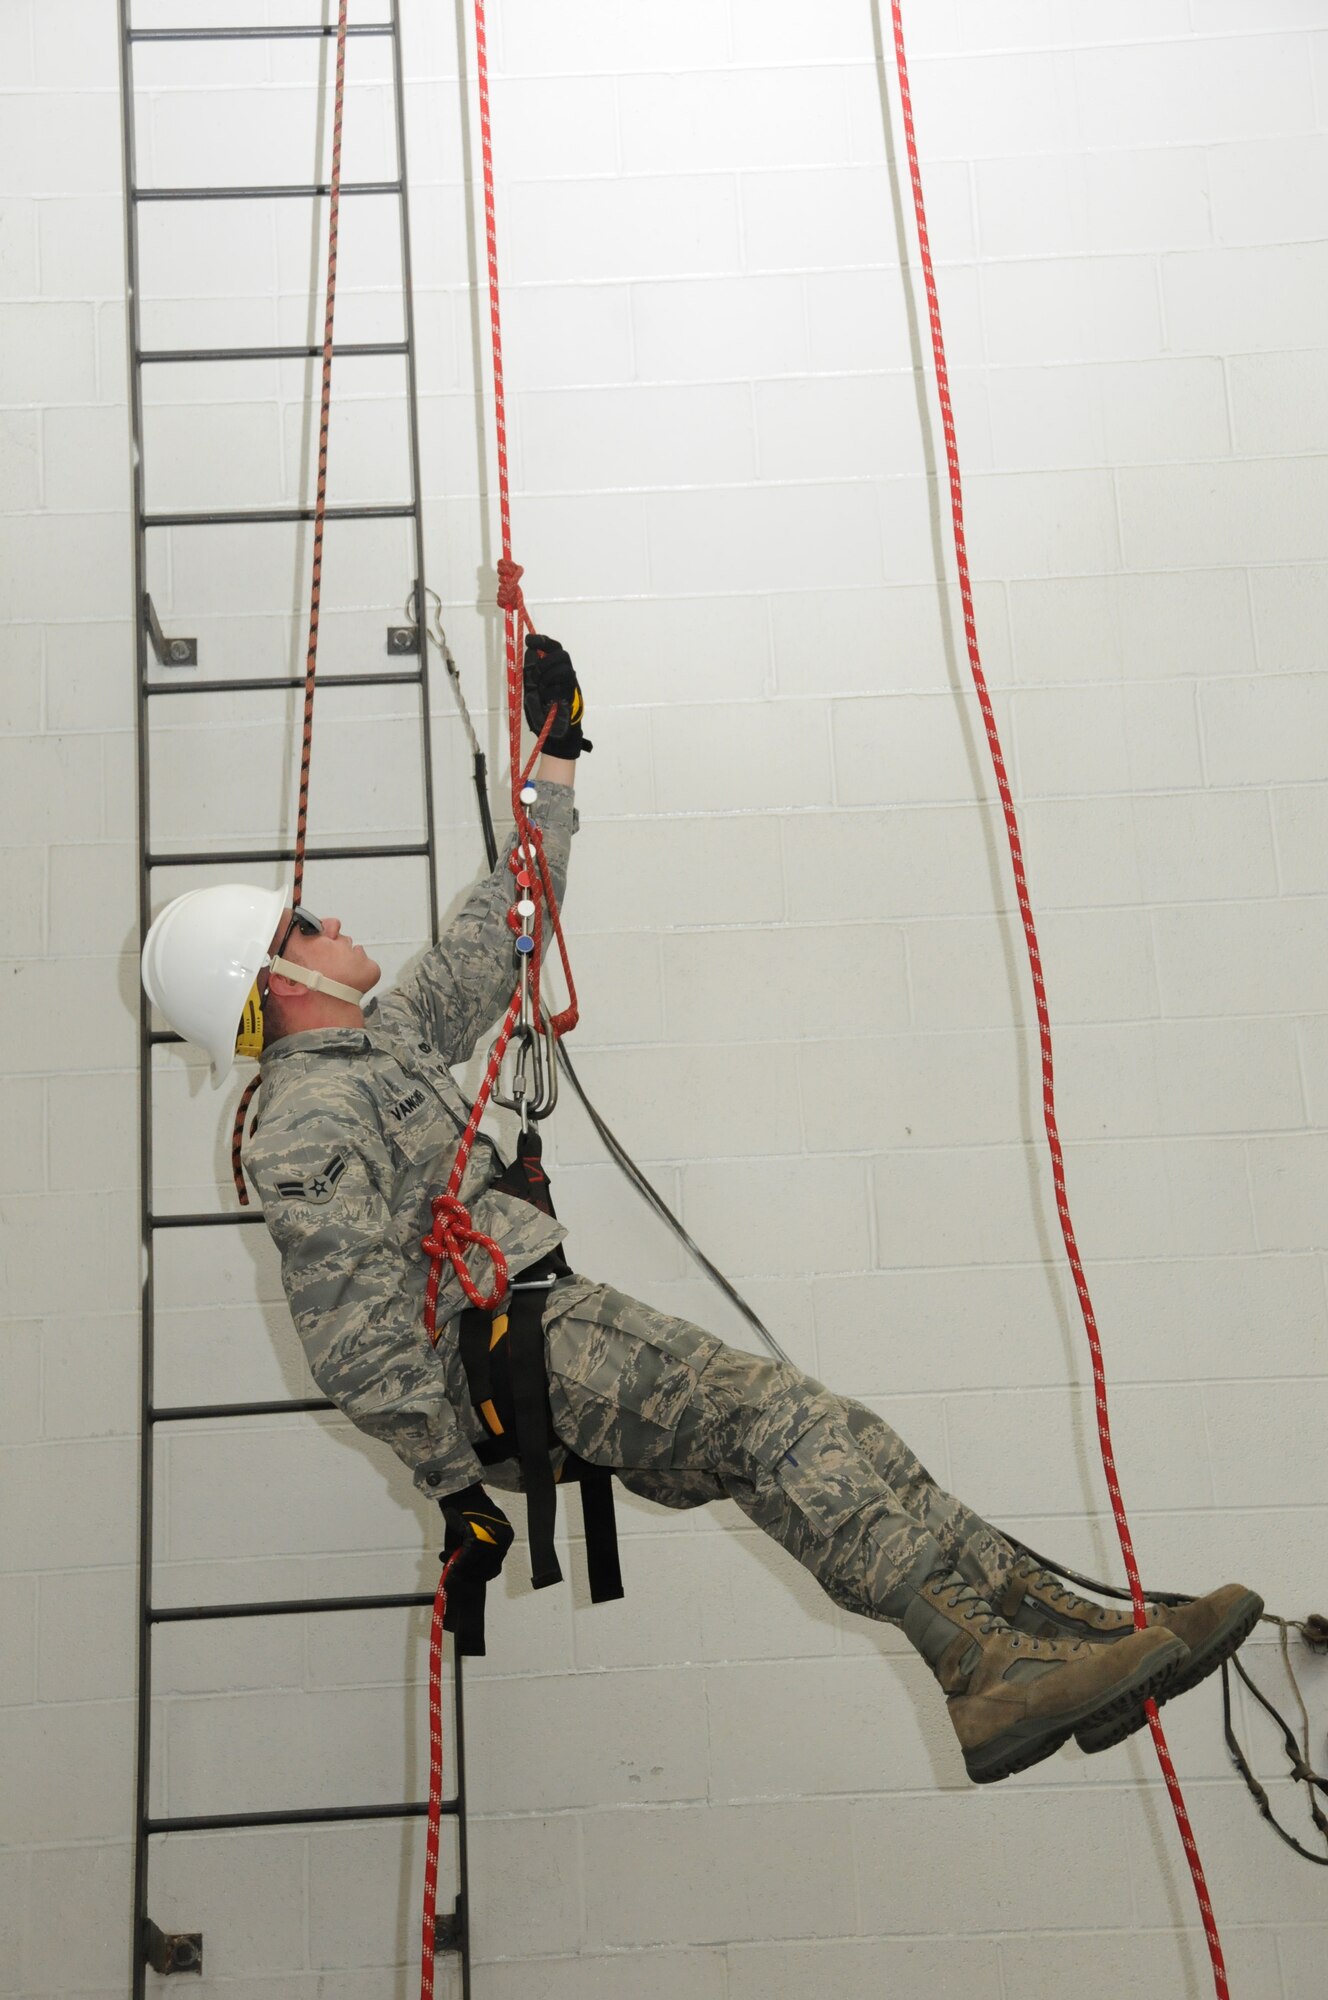 U.S. Air Force firefighters from the 180th Fighter Wing rappel inside of a training facility at the Toledo Fire and Rescue Department Training Academy, October 5, 2010.  Firefighters from the 180th Fighter Wing are participating in six days of training designed to prepare them for various rescue situations. (U.S. Air Force photo by Senior Airman Amber Williams/Released)